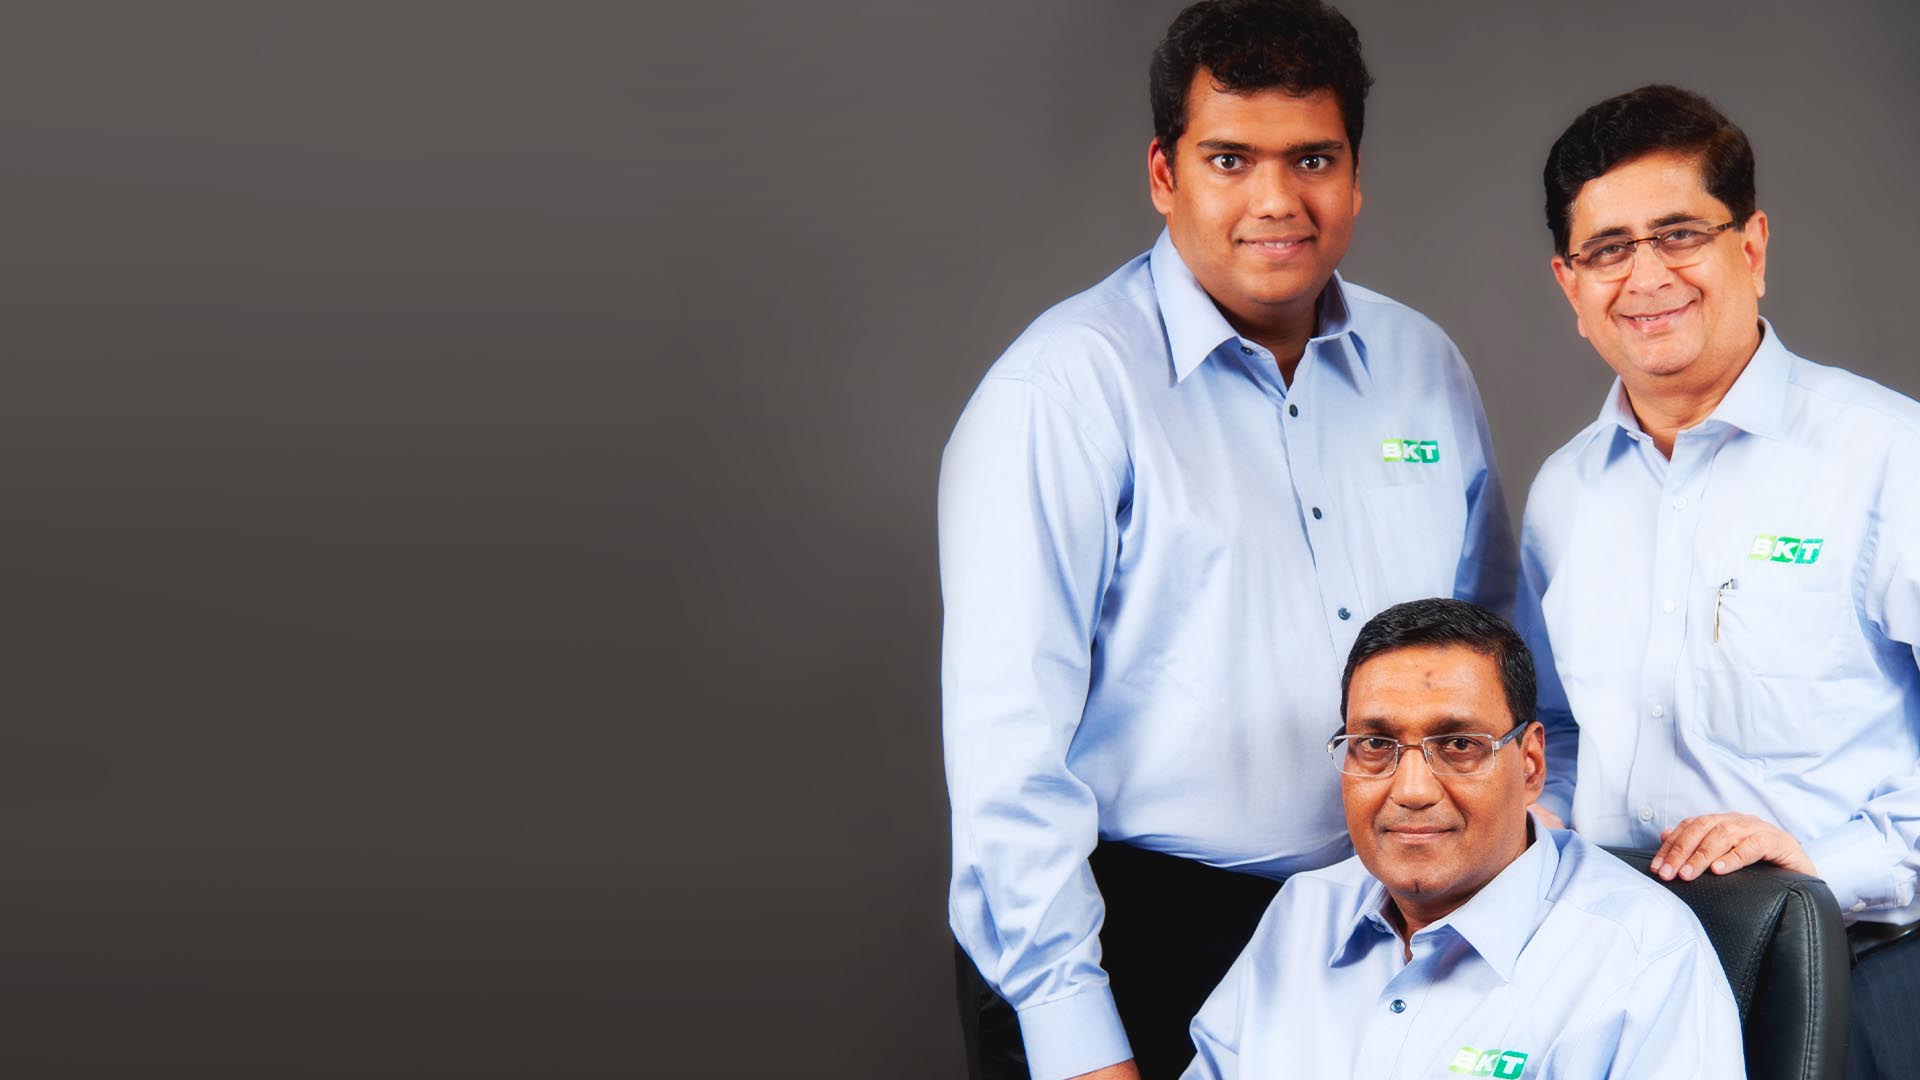 Meet your favorite family business: BKT